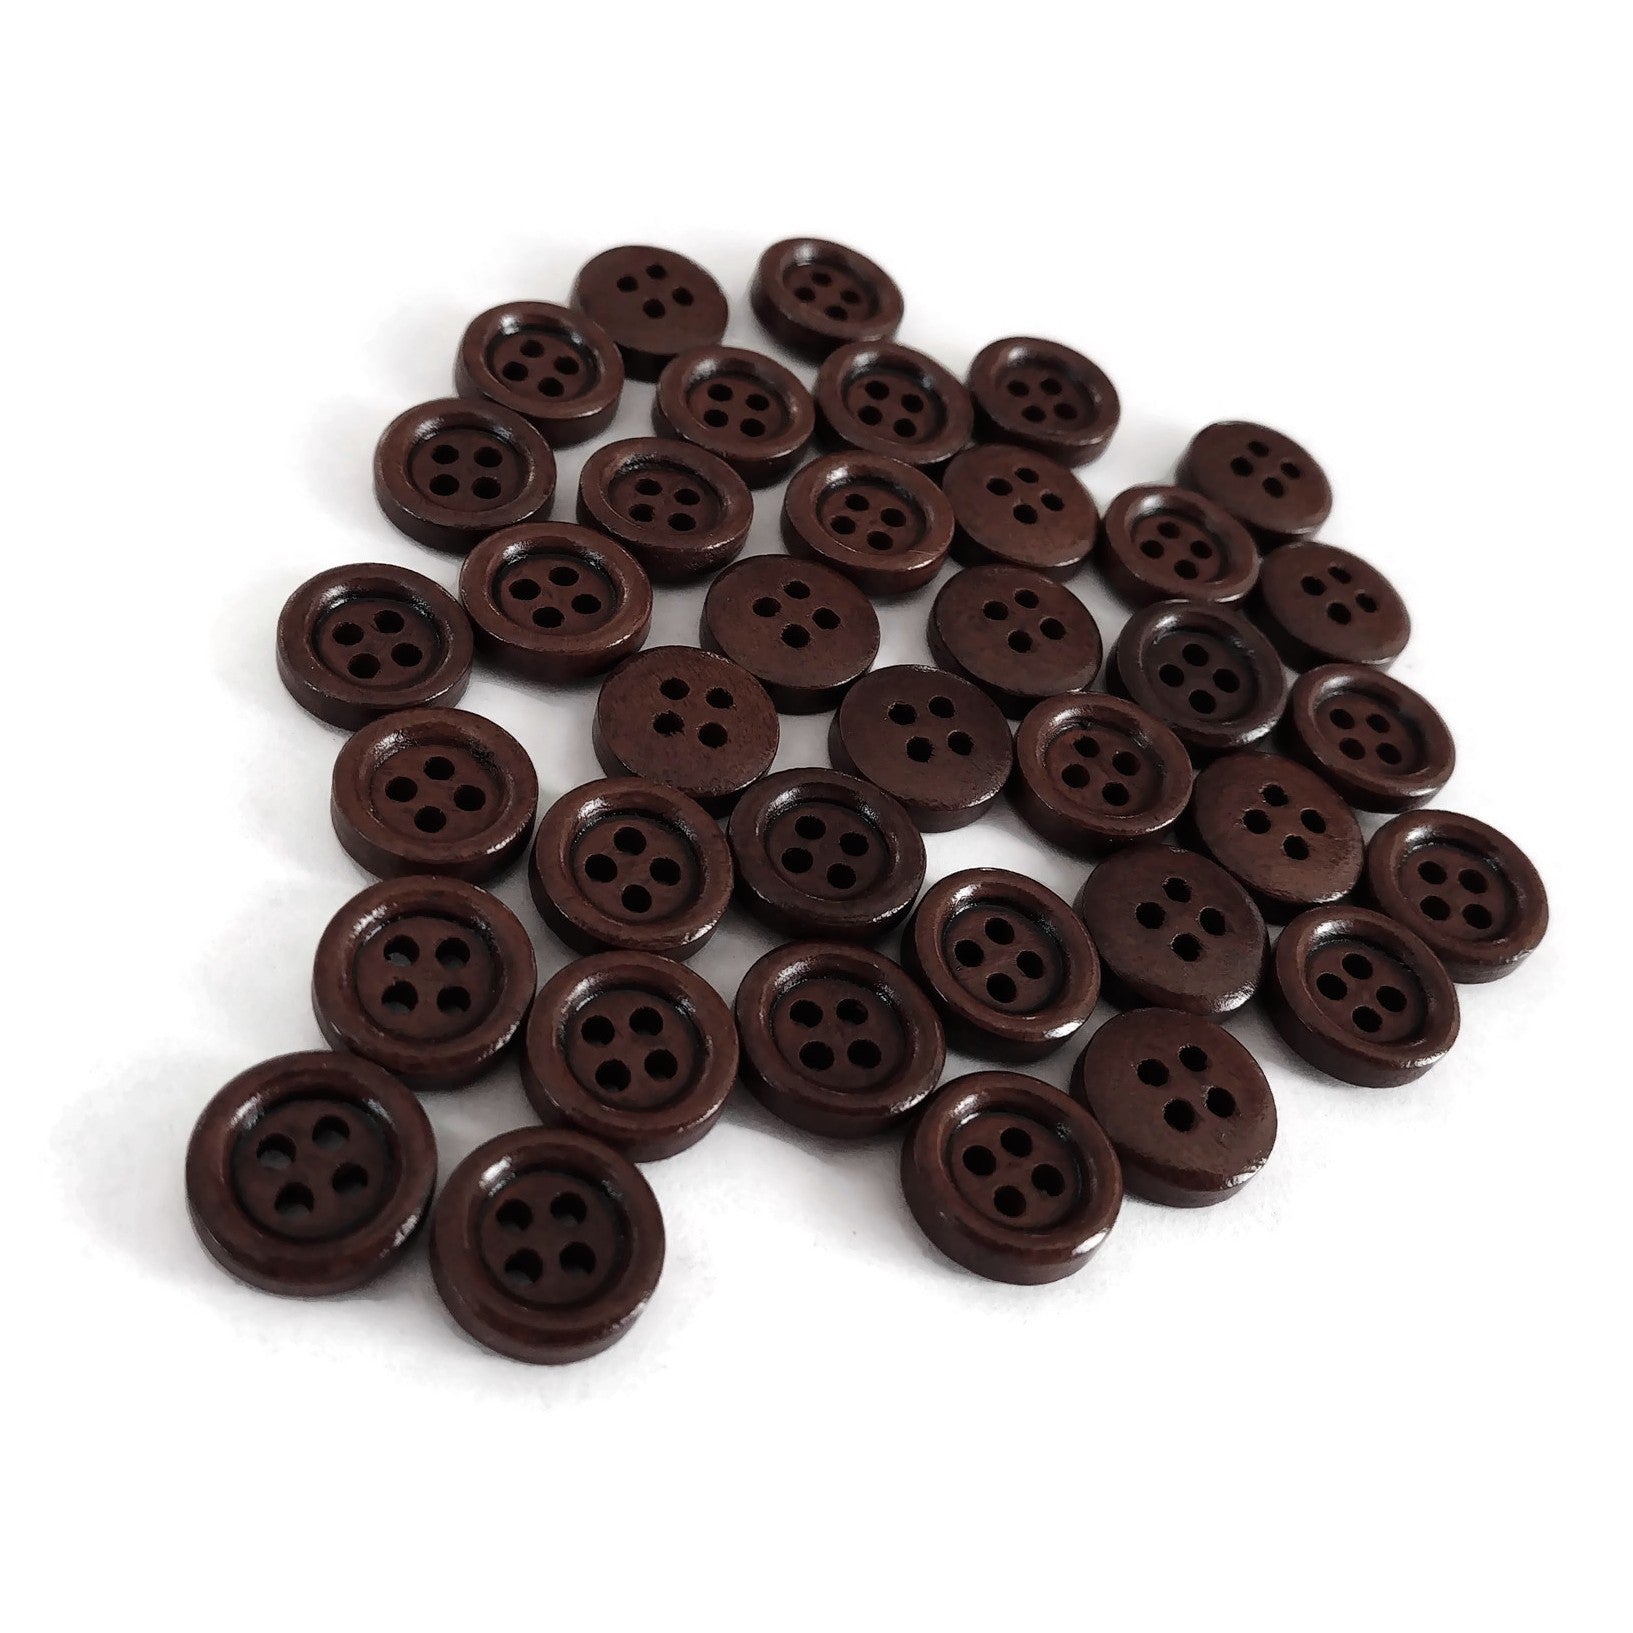 Mini Wood button - Brown 4 Holes Wooden Sewing Buttons 11mm - set of 36